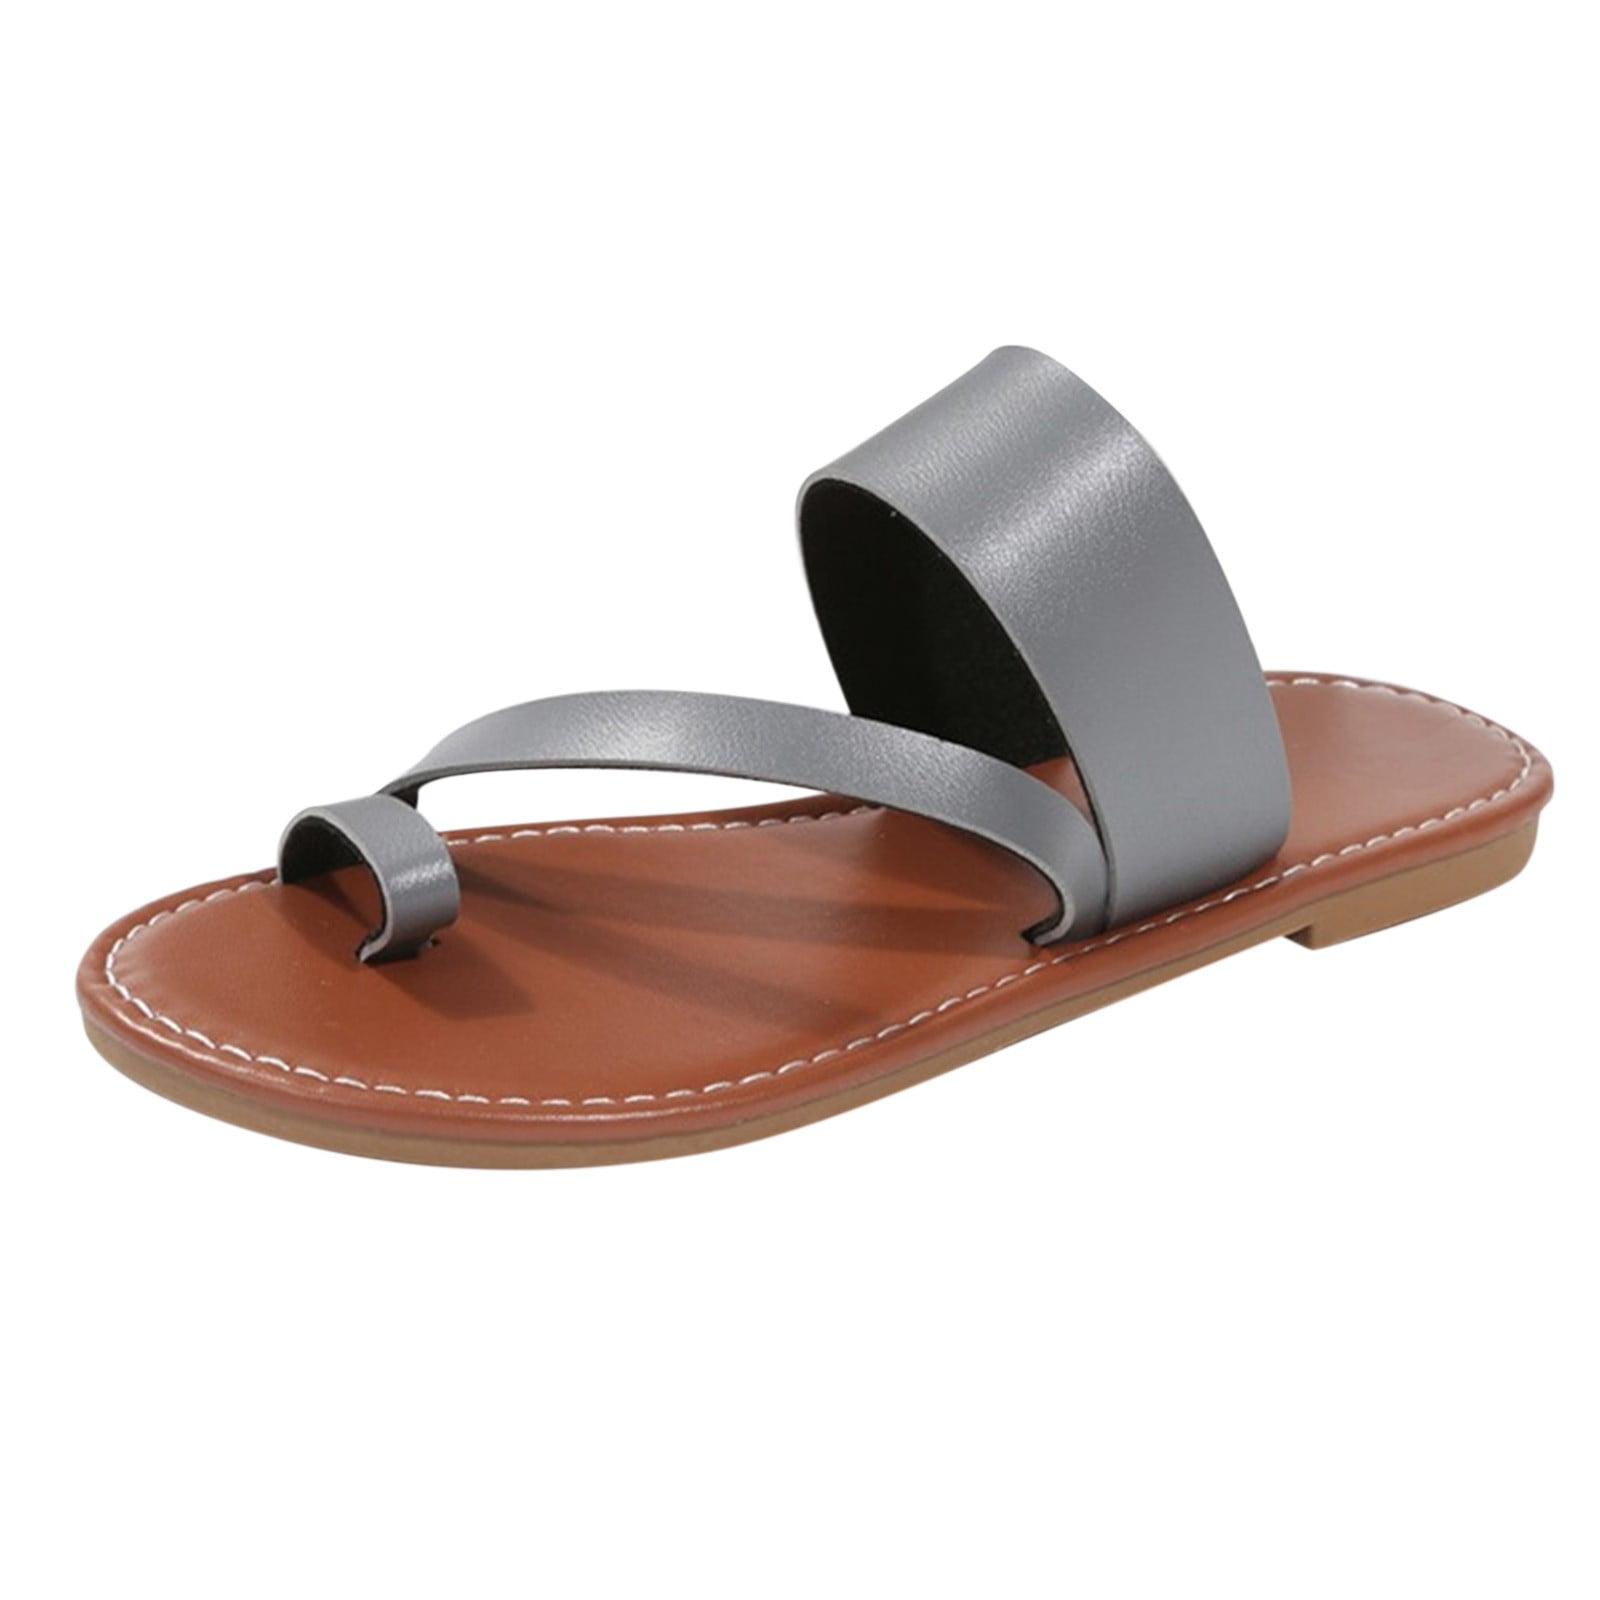 Accupressure Slippers With Magnetic Therapy For Natural Pain Relief &  Healthcare (Accu Paduka) | Buy Online at best price in India from  Healthklin.com